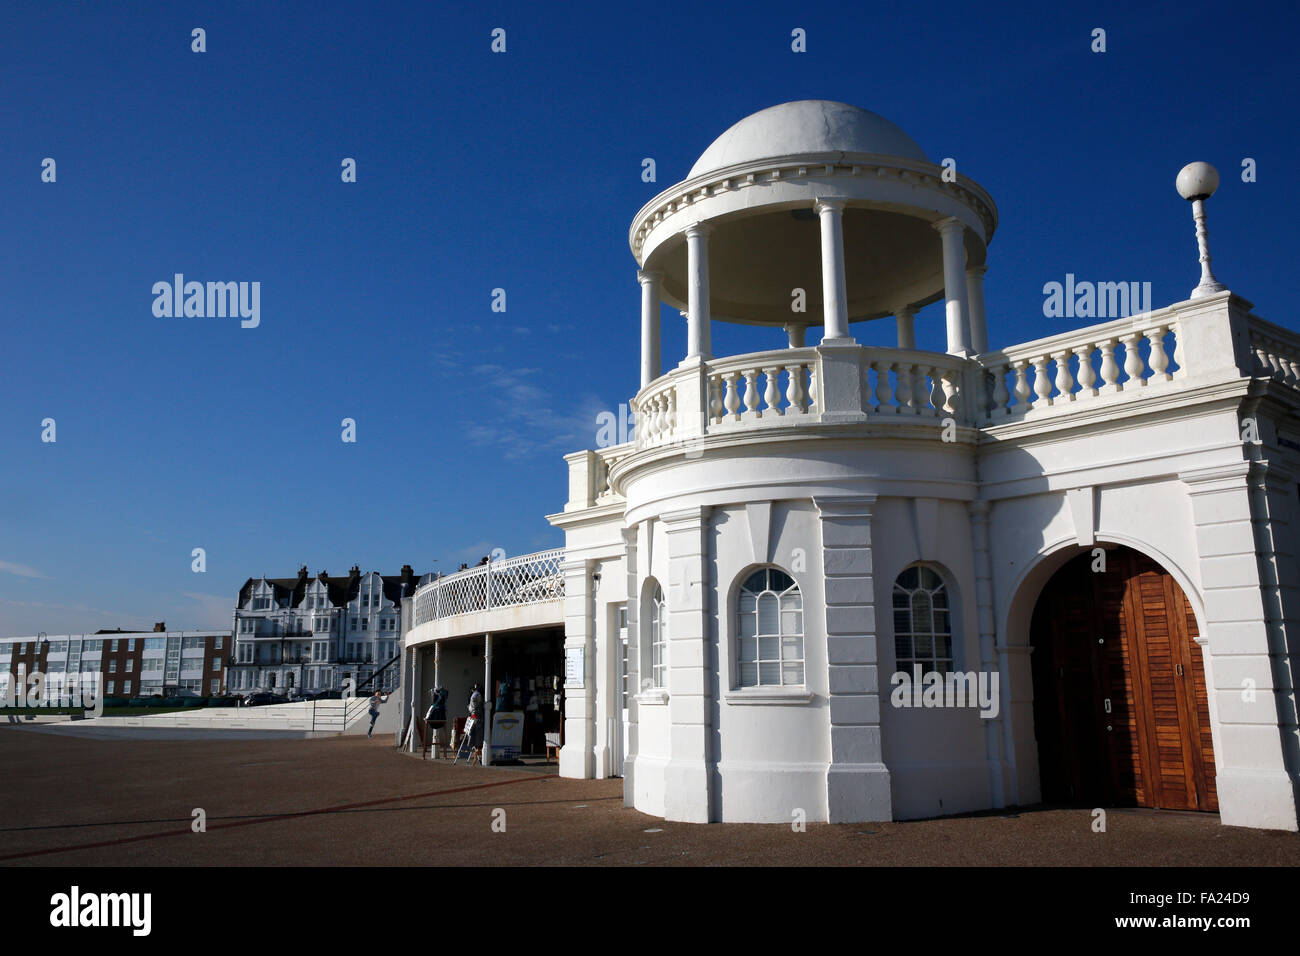 A general view of De La Warr pavilion Bexhill on Sea East Sussex in England October 2015 Stock Photo